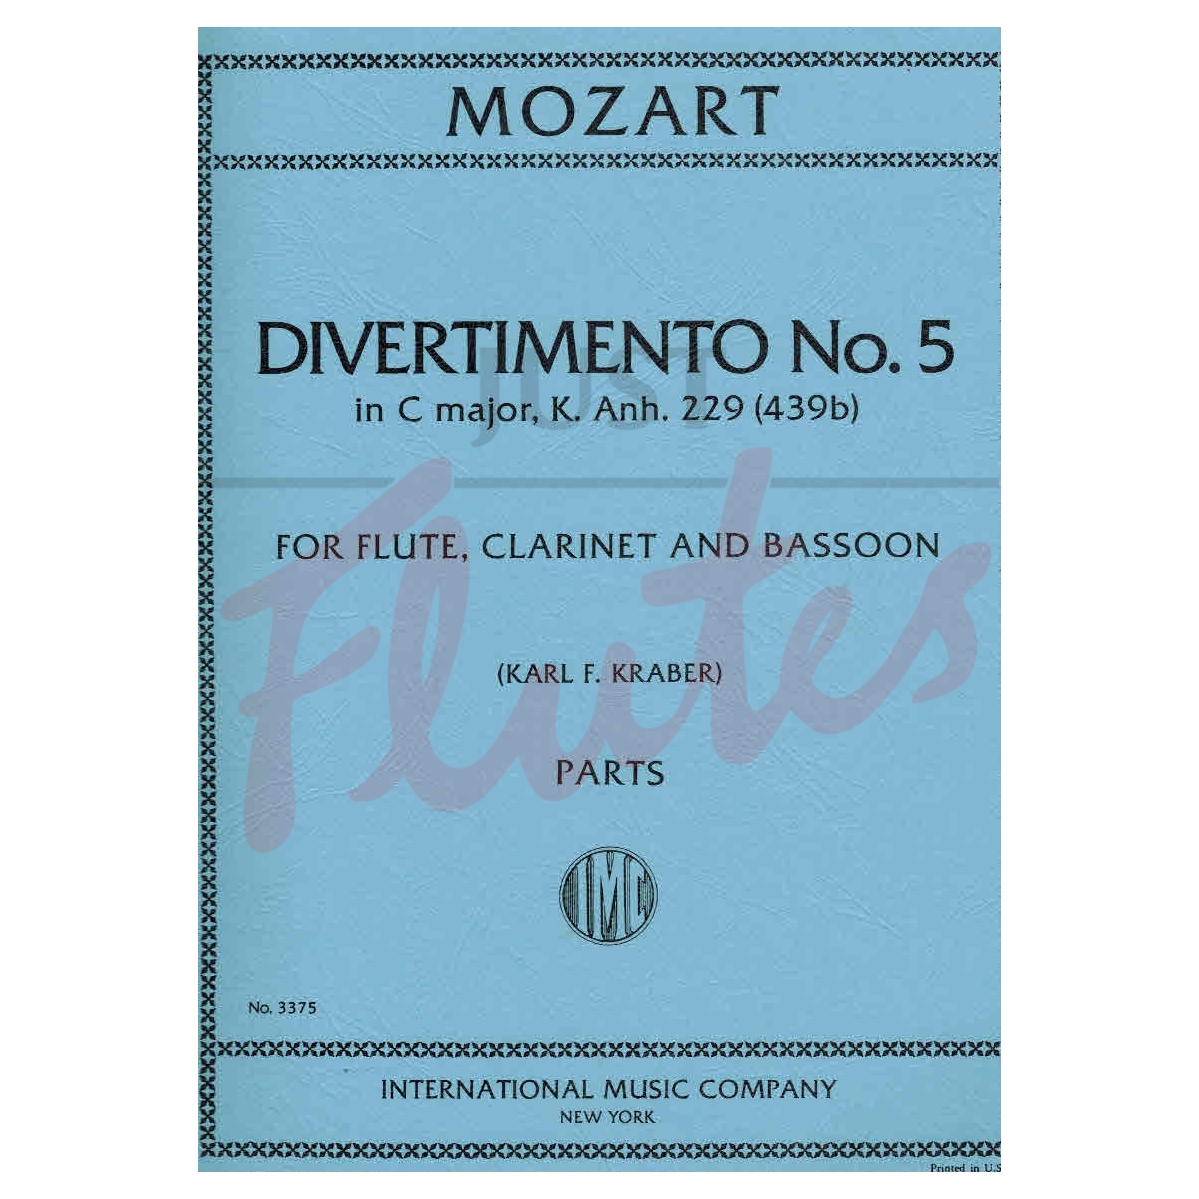 Divertimento No.5 in C major for Flute, Clarinet and Bassoon